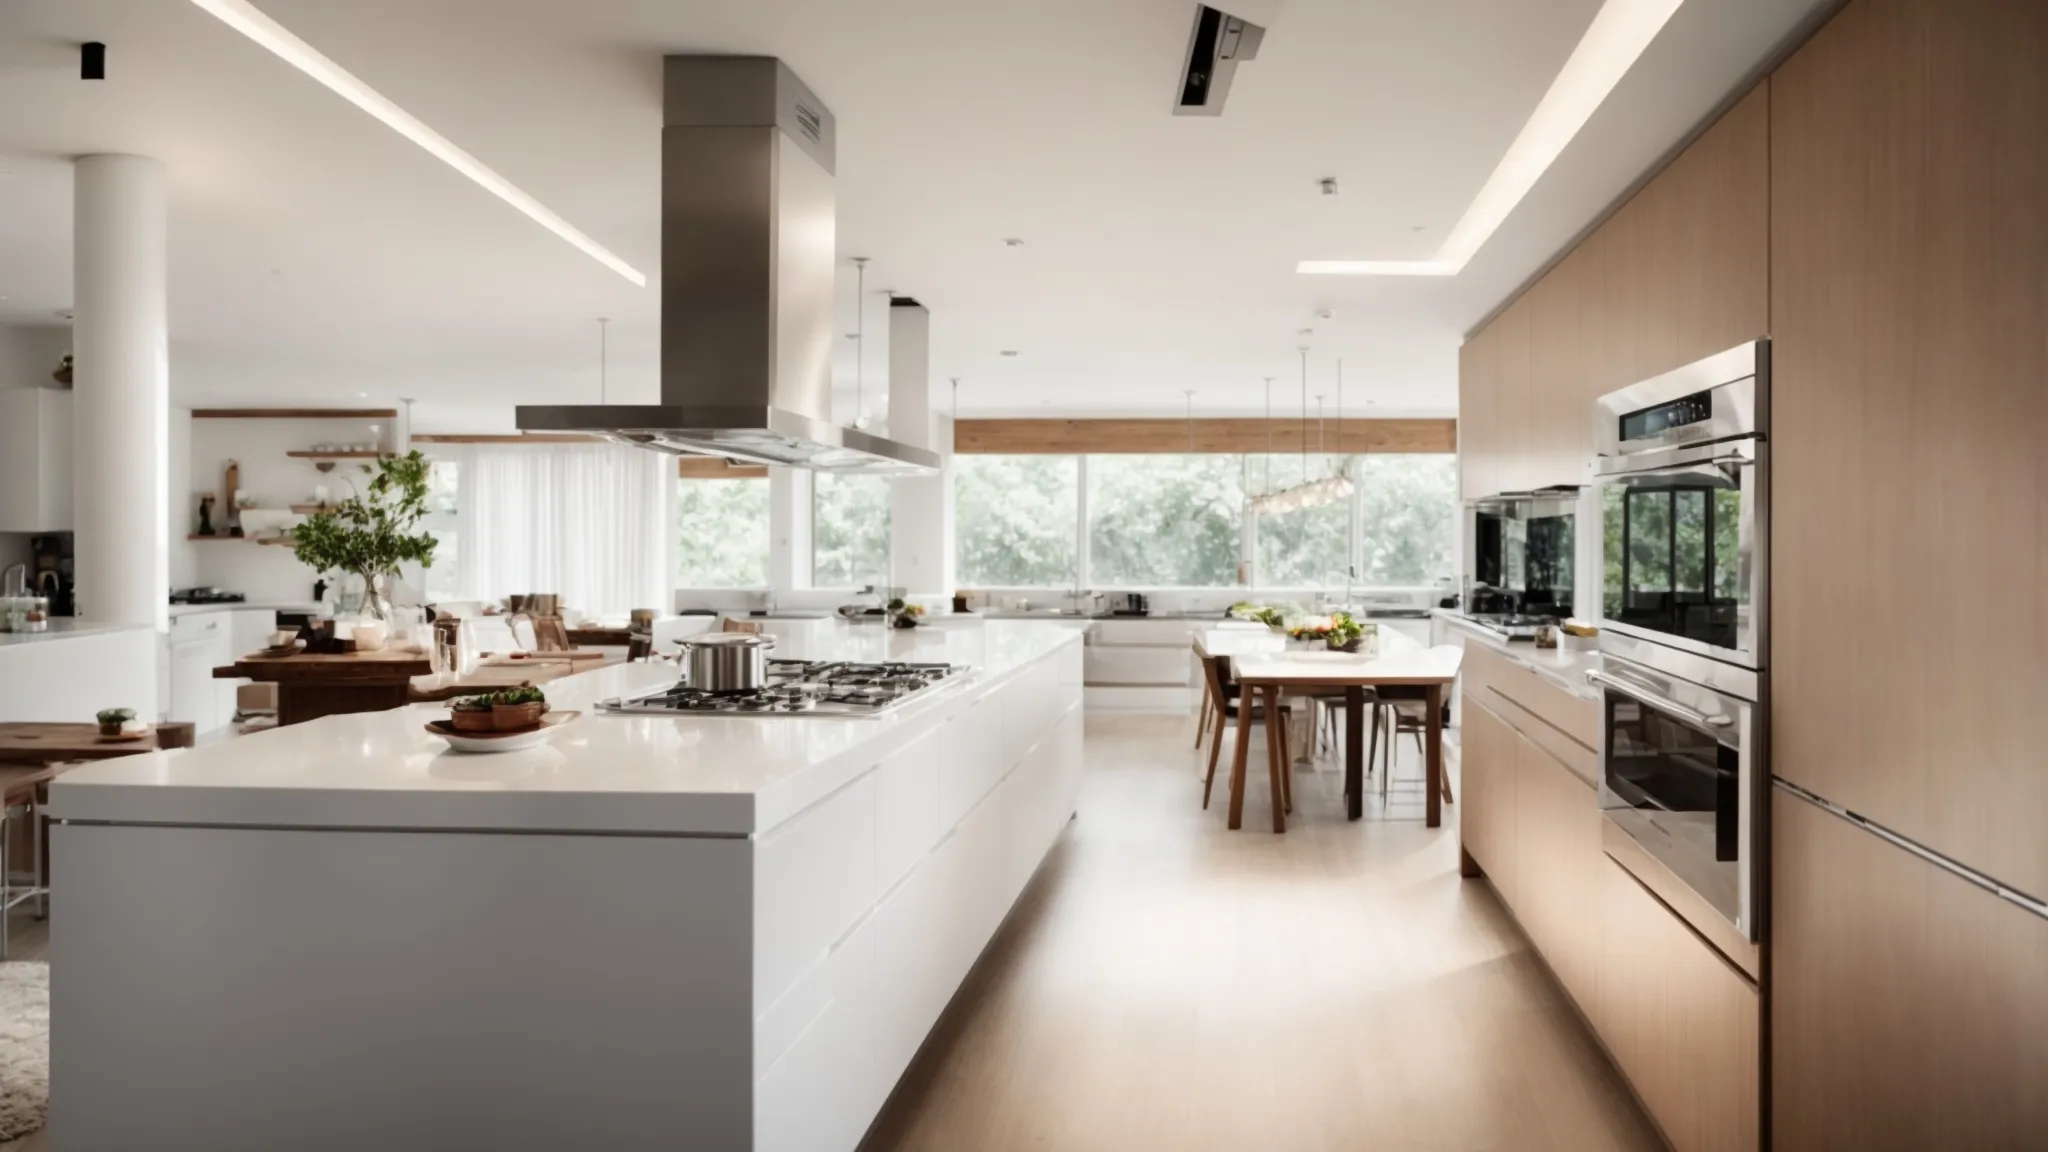 a spacious, naturally lit kitchen with sleek, modern lighting fixtures and a discreet, efficient ventilation system.